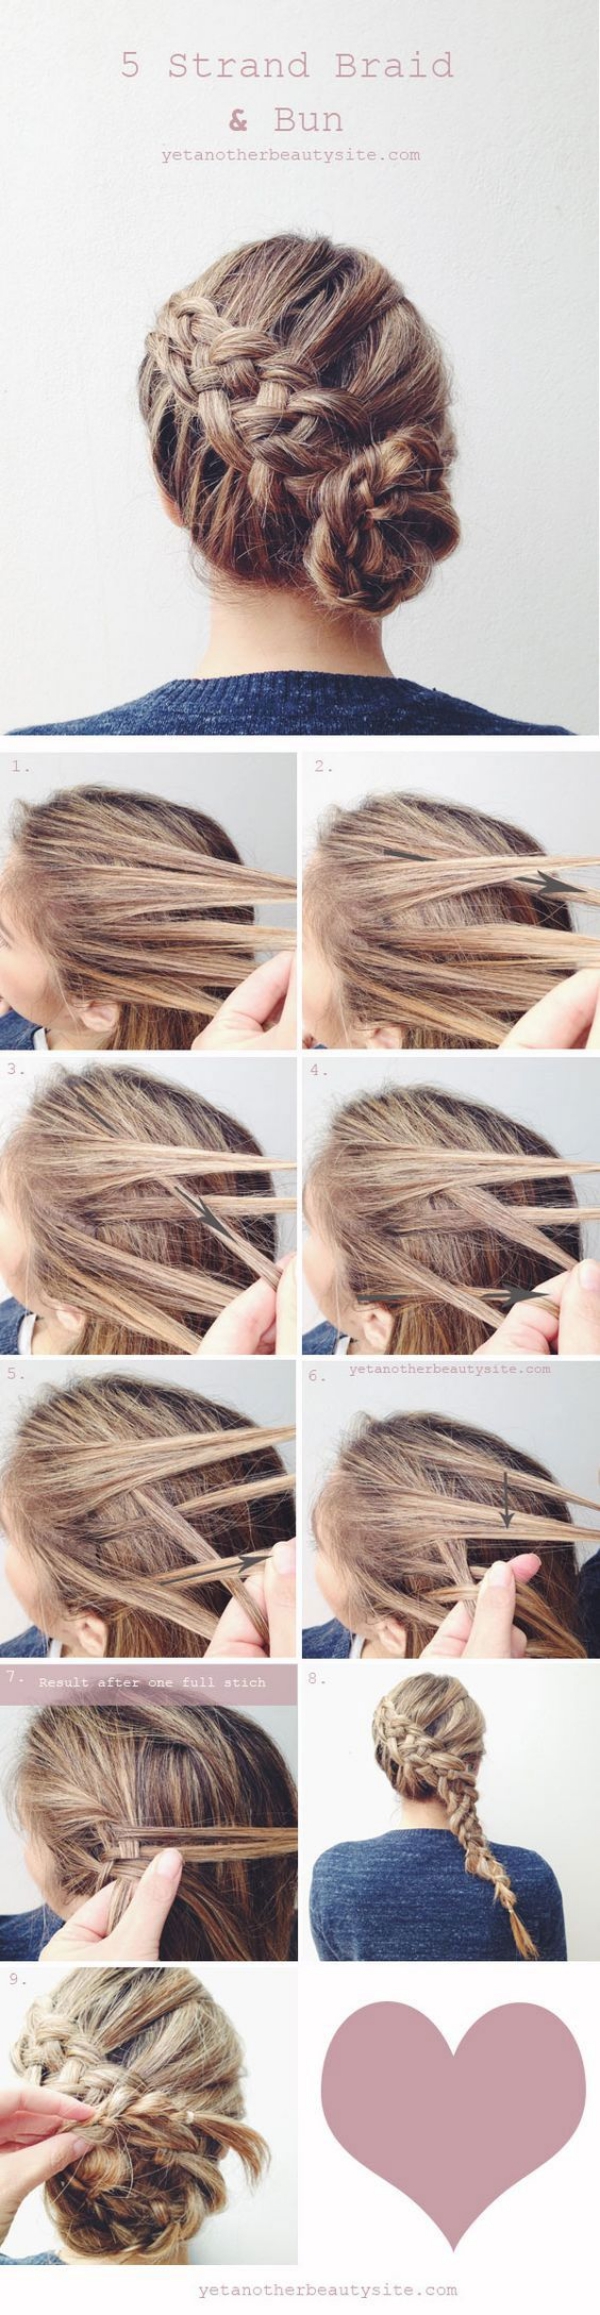 Simple Five Minute Hairstyles00002